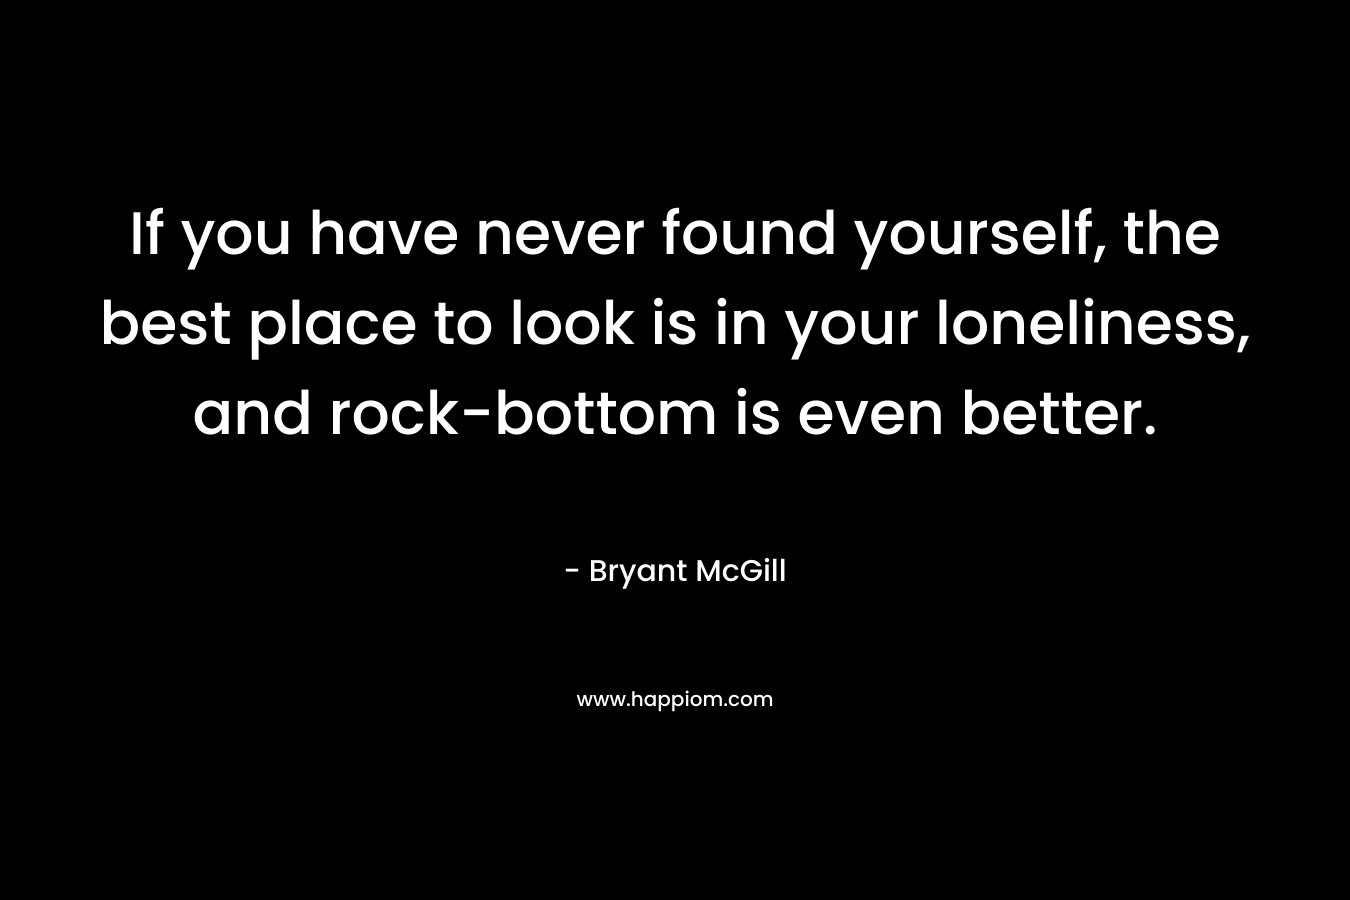 If you have never found yourself, the best place to look is in your loneliness, and rock-bottom is even better.